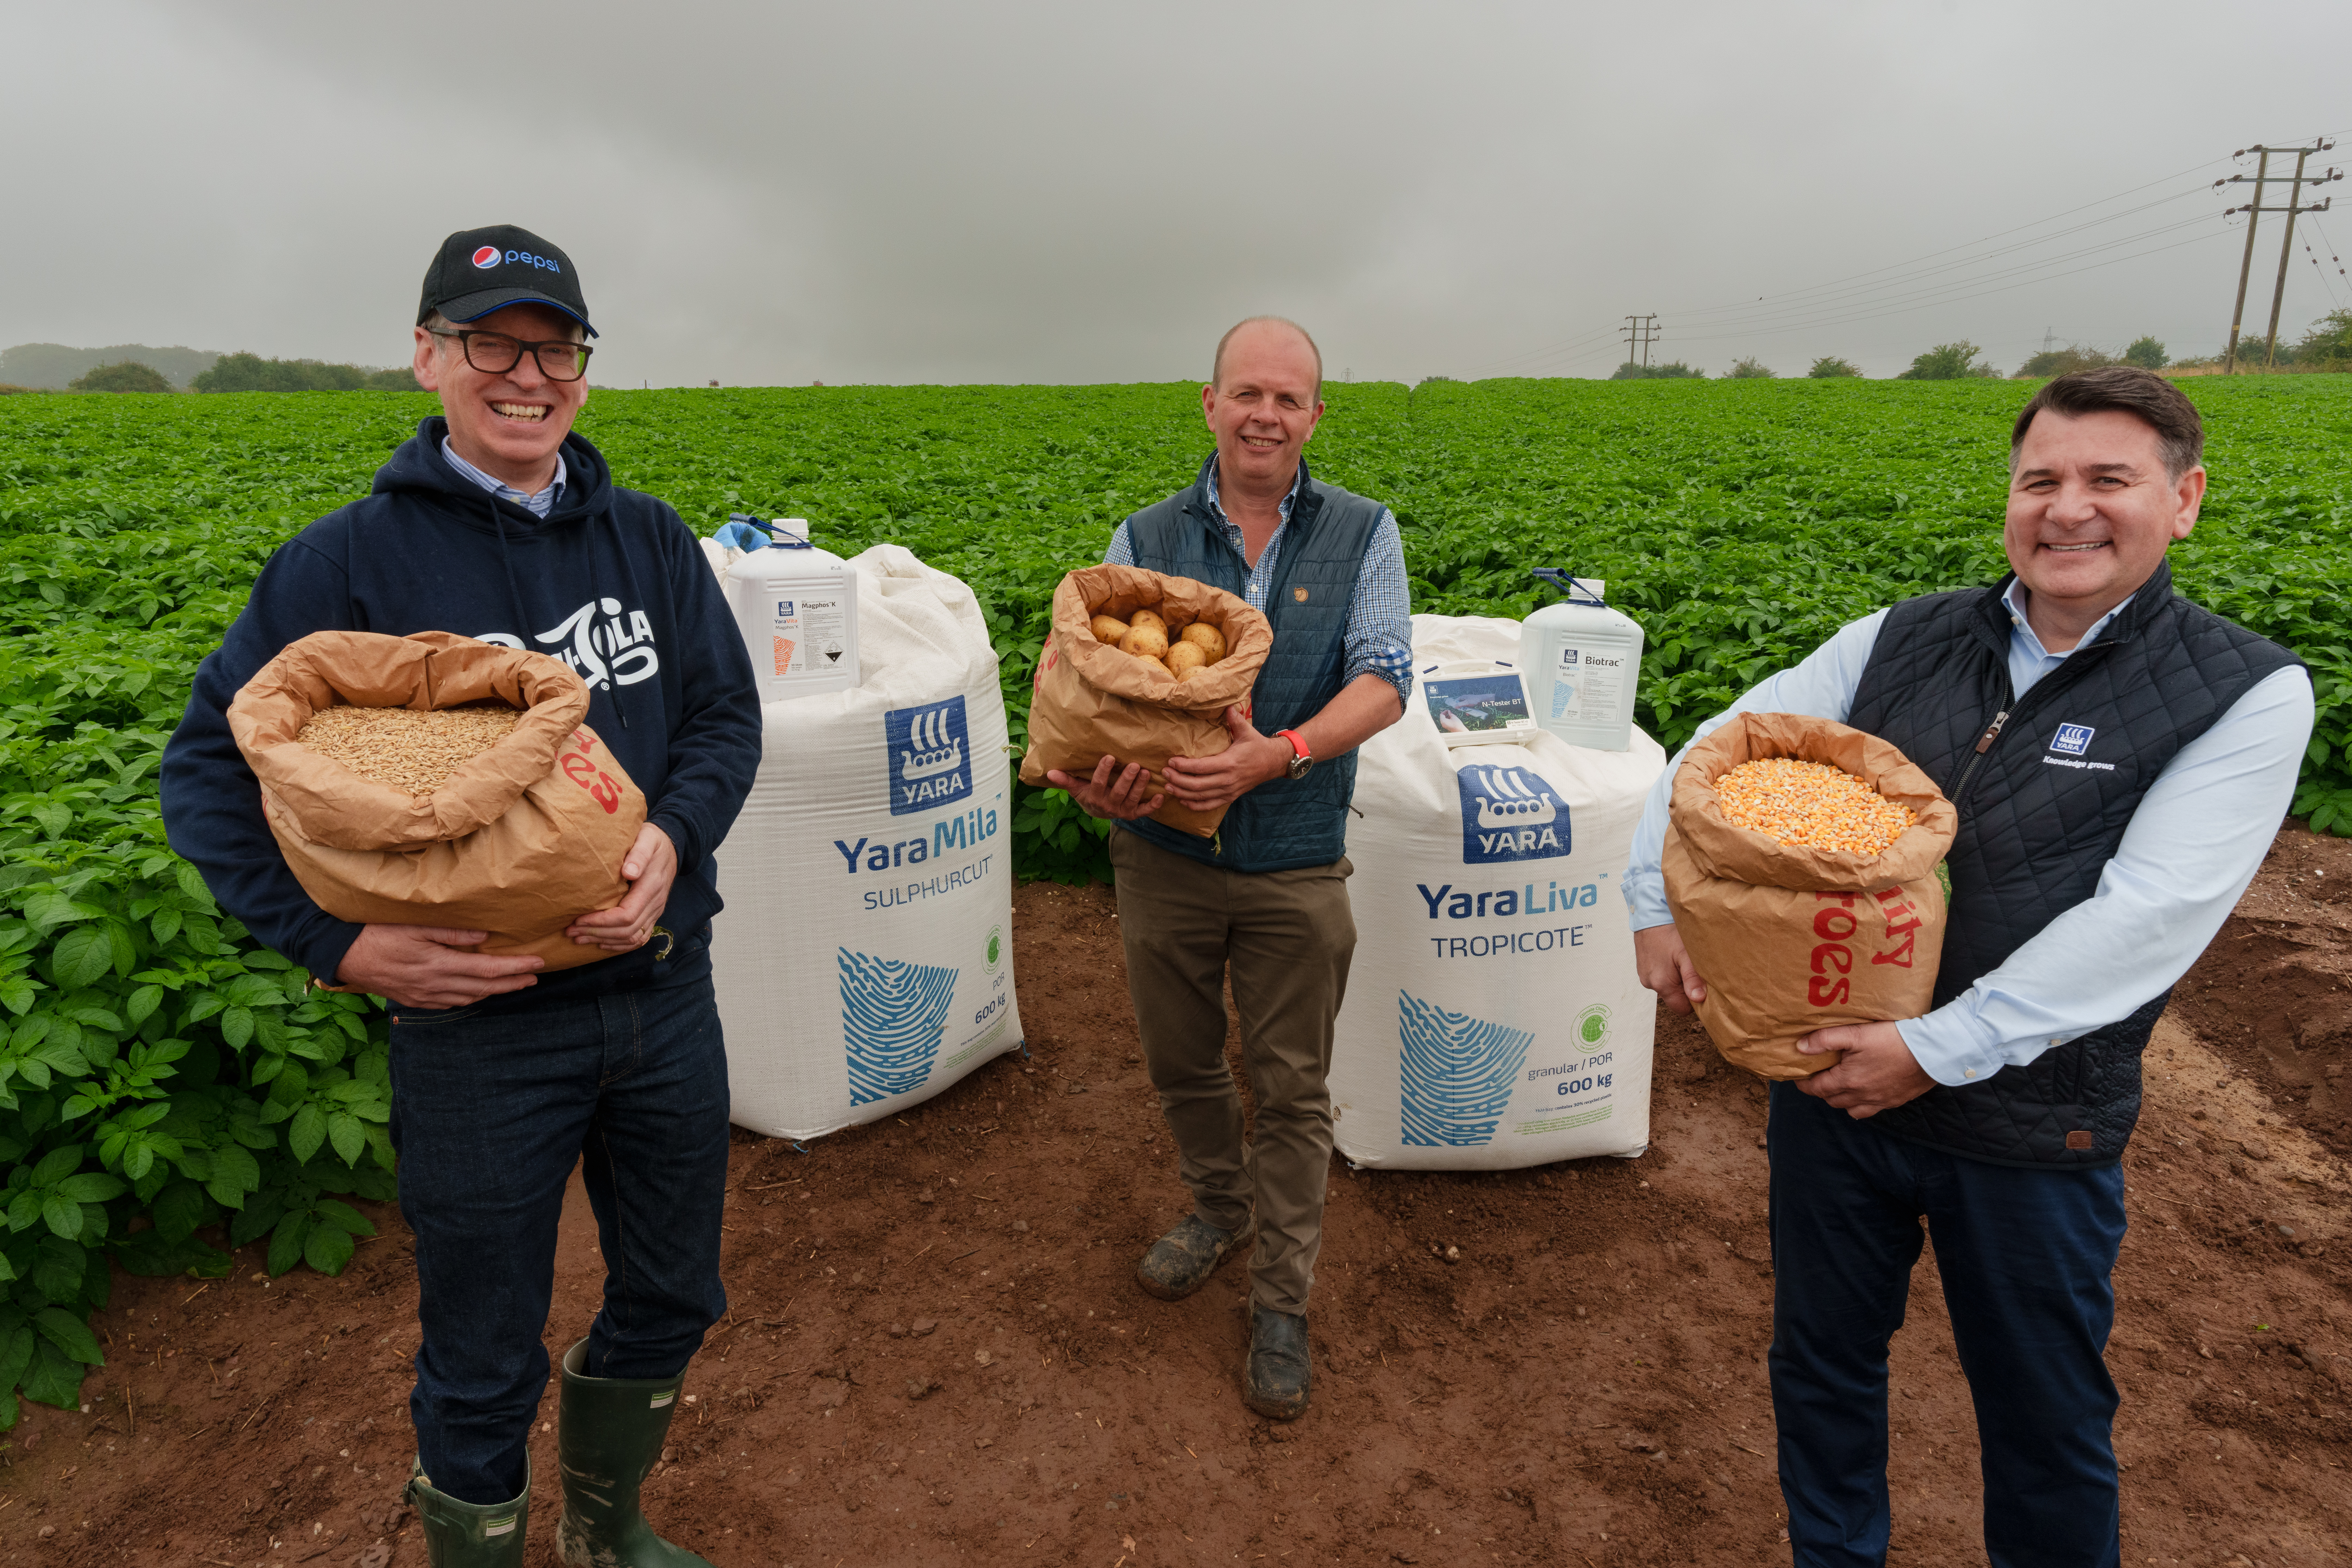 Representatives from Yara, PepsiCo and Strawsons Limited in a field